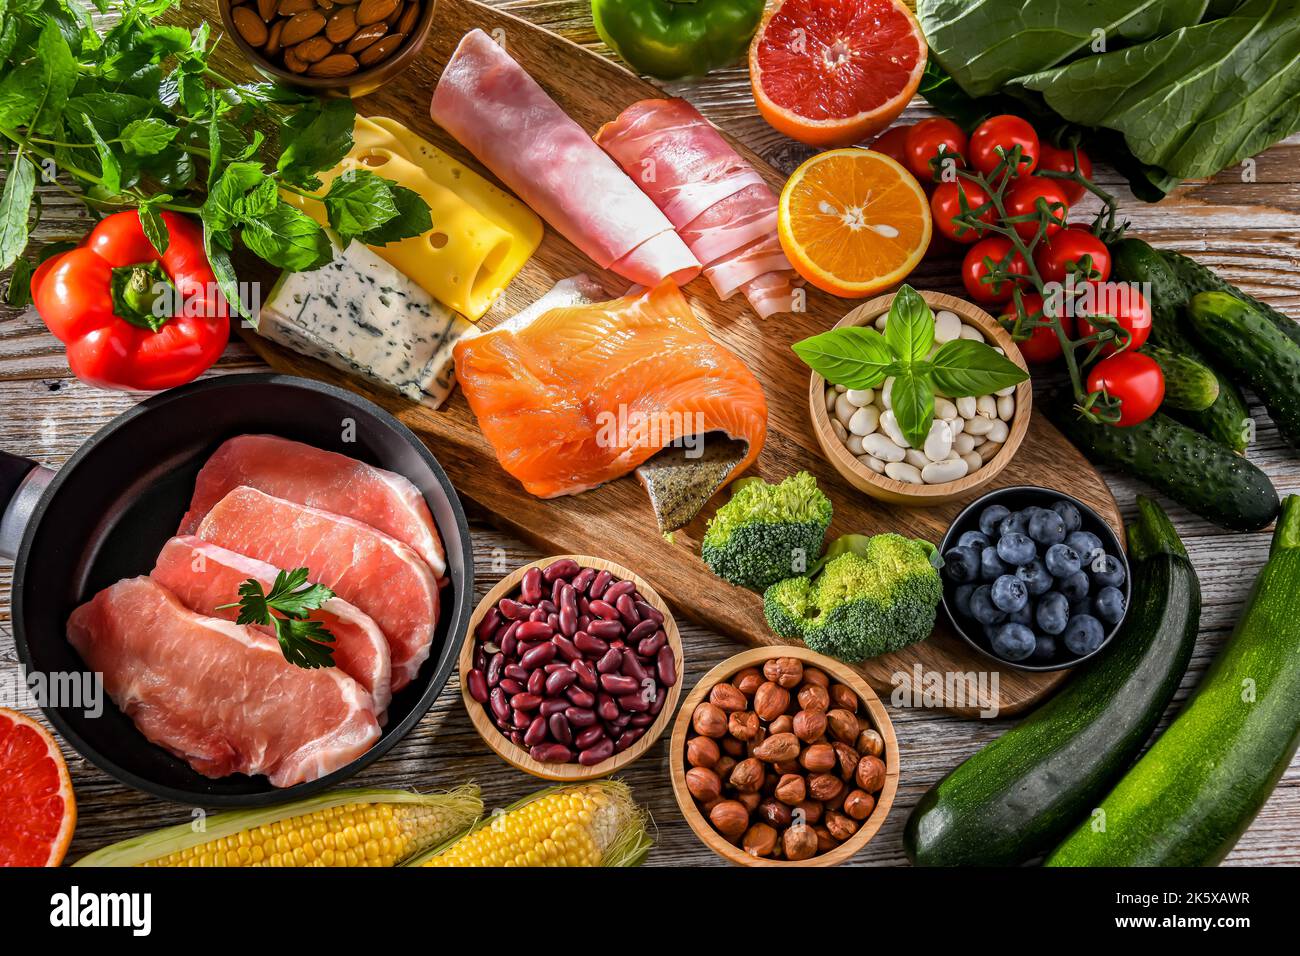 Low-carbohydrate diet products recommended for weight loss. Stock Photo